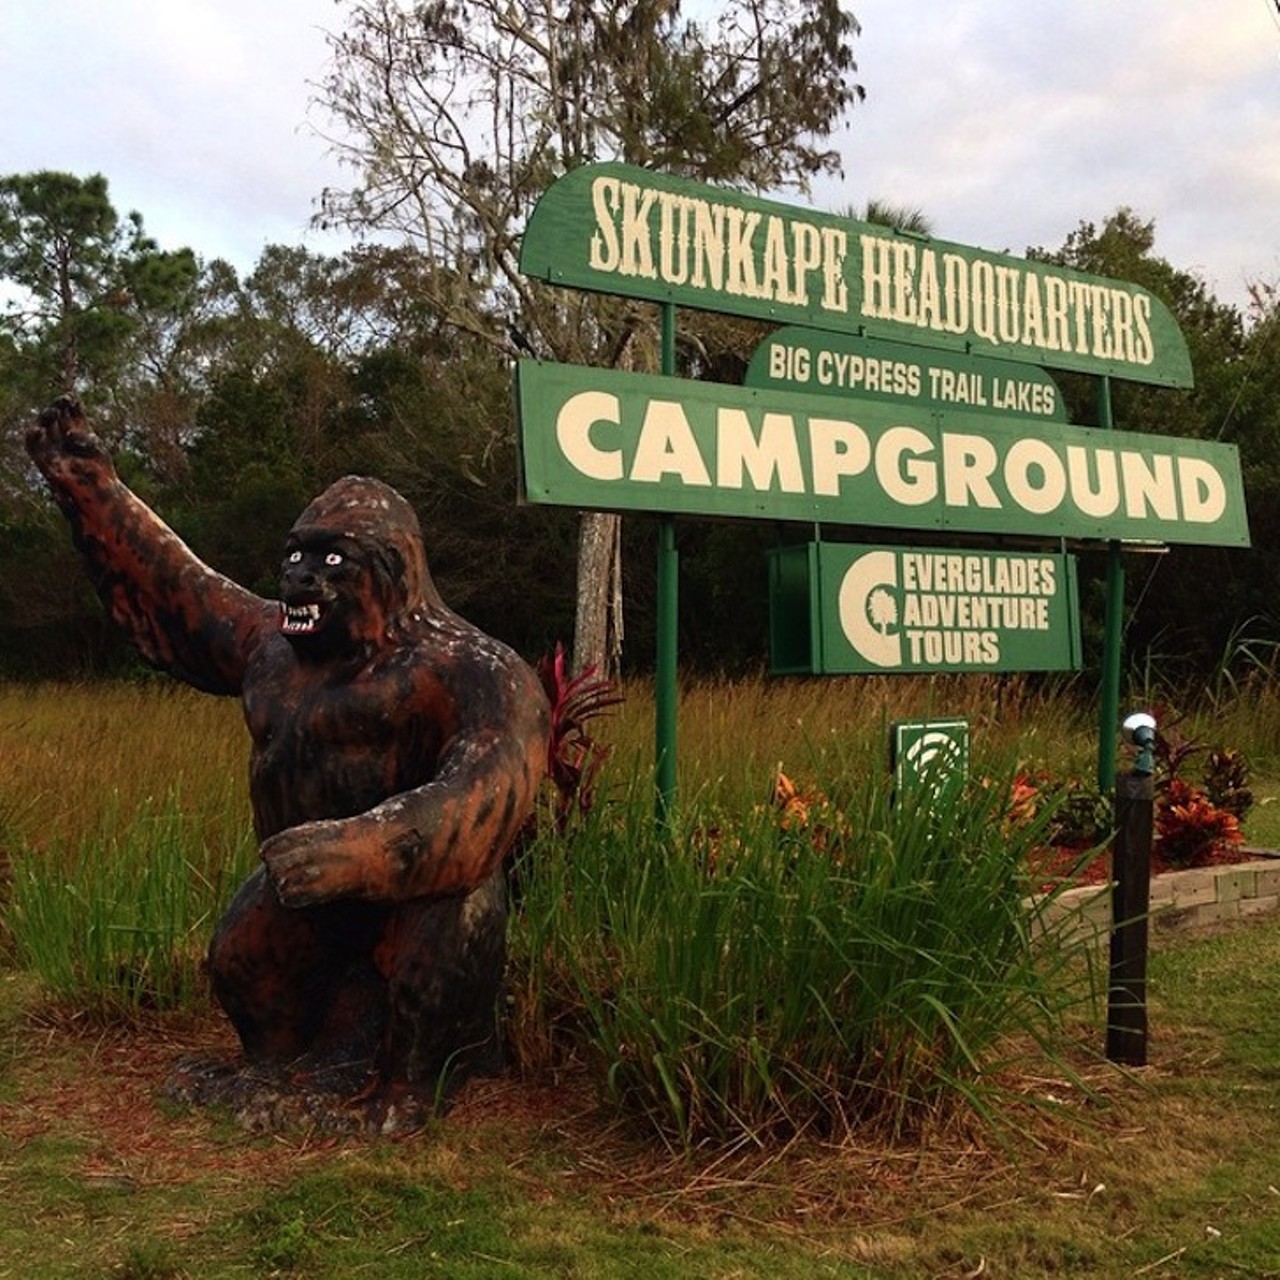 Look for a skunk ape
Skunk Ape Research Headquarters l 40904 Tamiami Trail East, Ochopee l (239) 695-2275
The Everglades is home to large, hairy Skunk Ape, a relative of the elusive Big Foot. People speculate that the Skunk Ape smells like methane or rotten eggs because it sleeps in abandoned alligator dens with dead animal carcasses. Join the two-day adventure where you can ride airboats, drive swamp buggies and trek through the muck looking for a glimpse of mysterious creature.
Photo via topensandoemviajar/Instagram